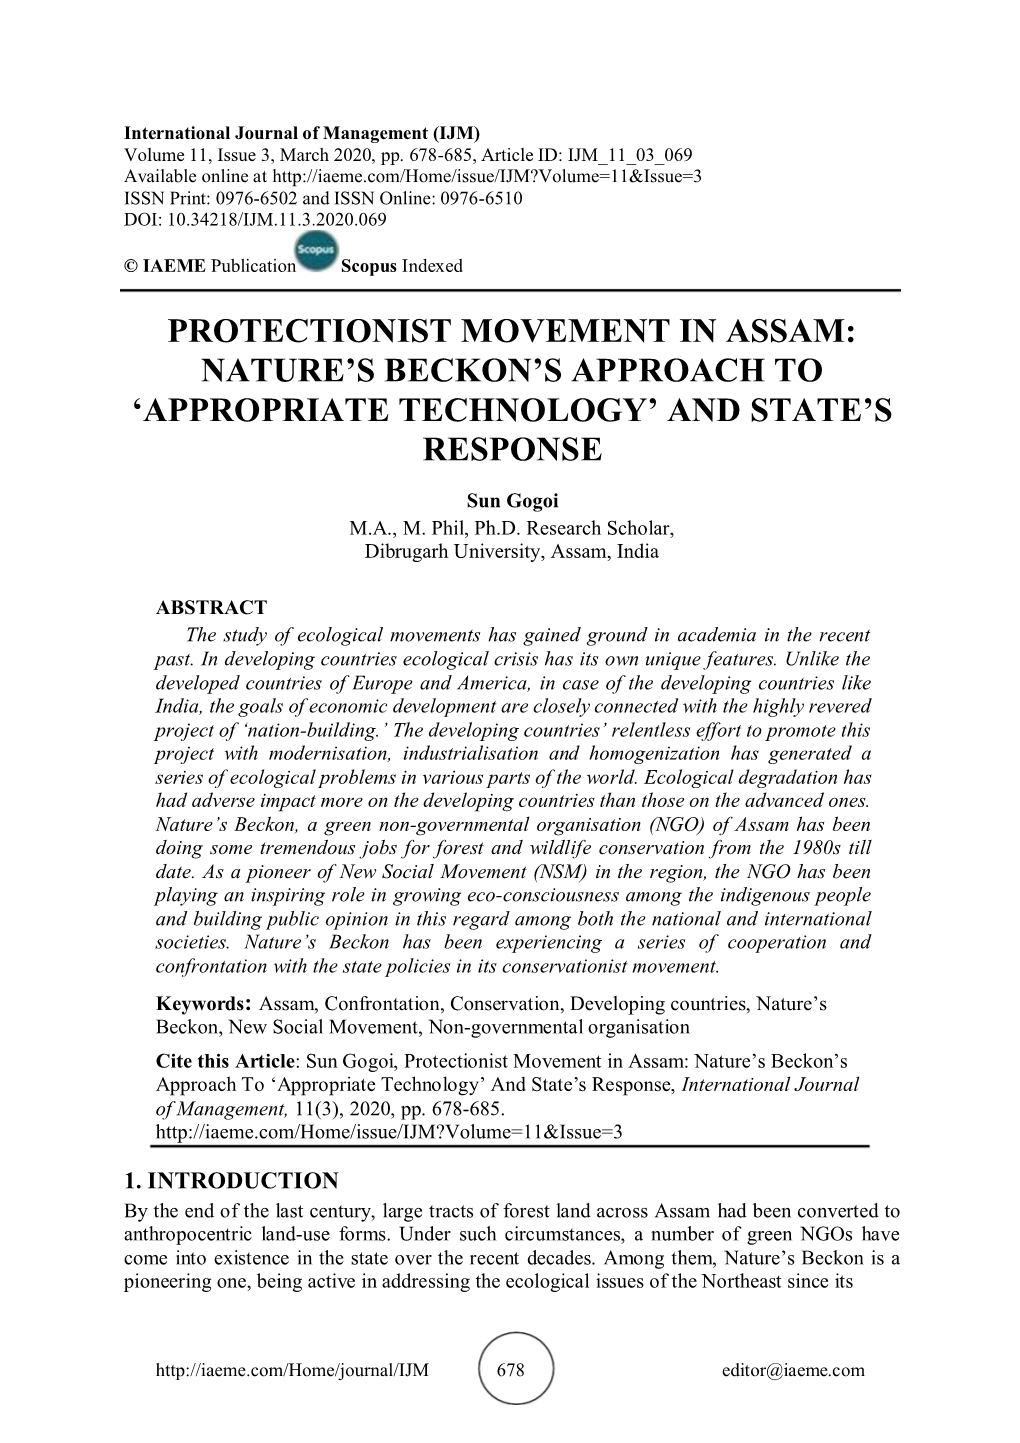 Protectionist Movement in Assam: Nature's Beckon's Approach To